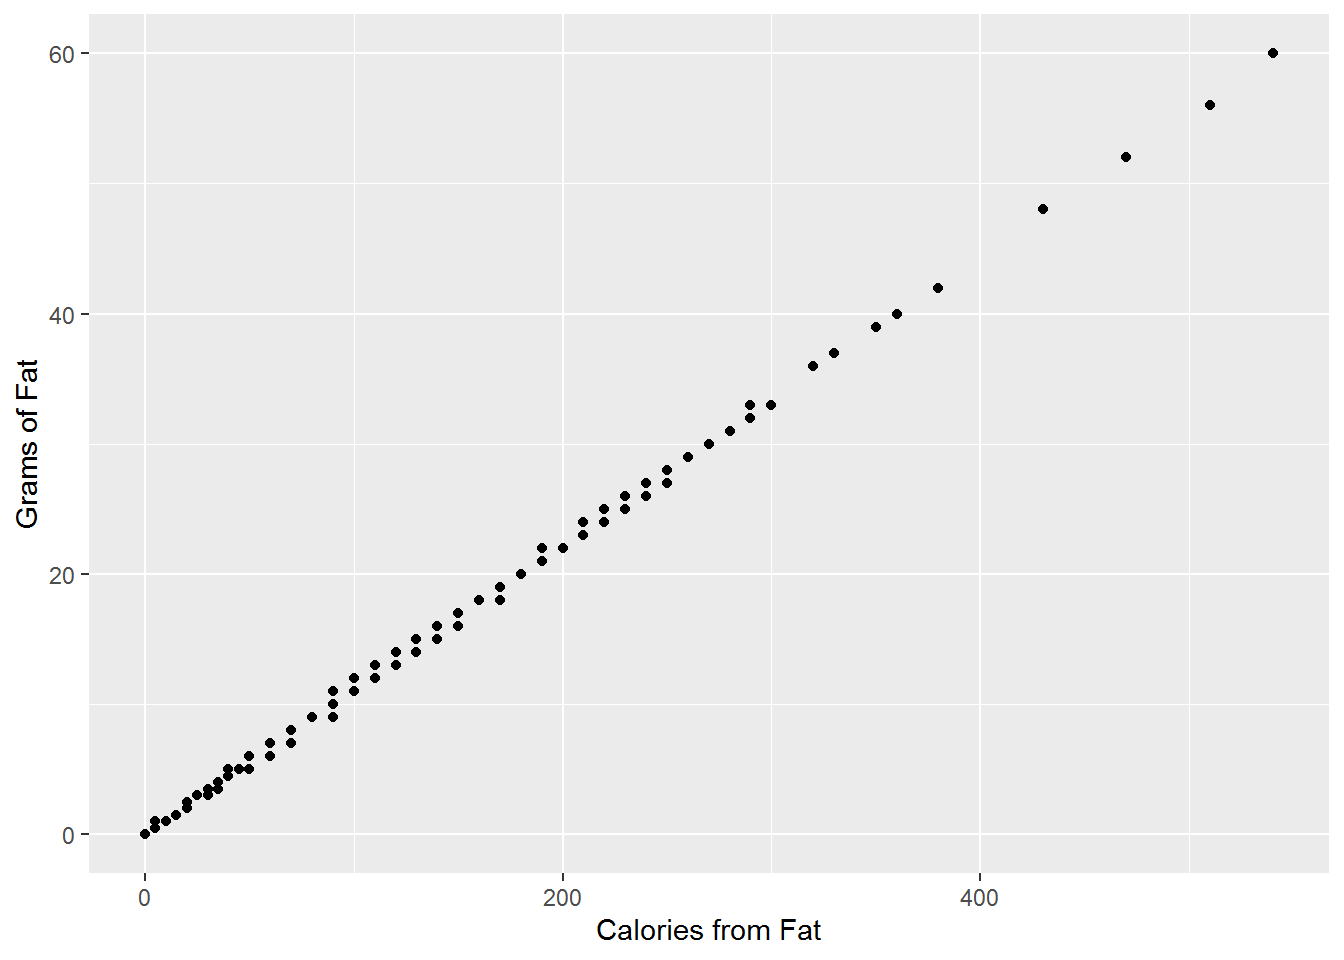 Fat and Calories from Fat (Pearson: 0.9996, Kendall: 0.9942)